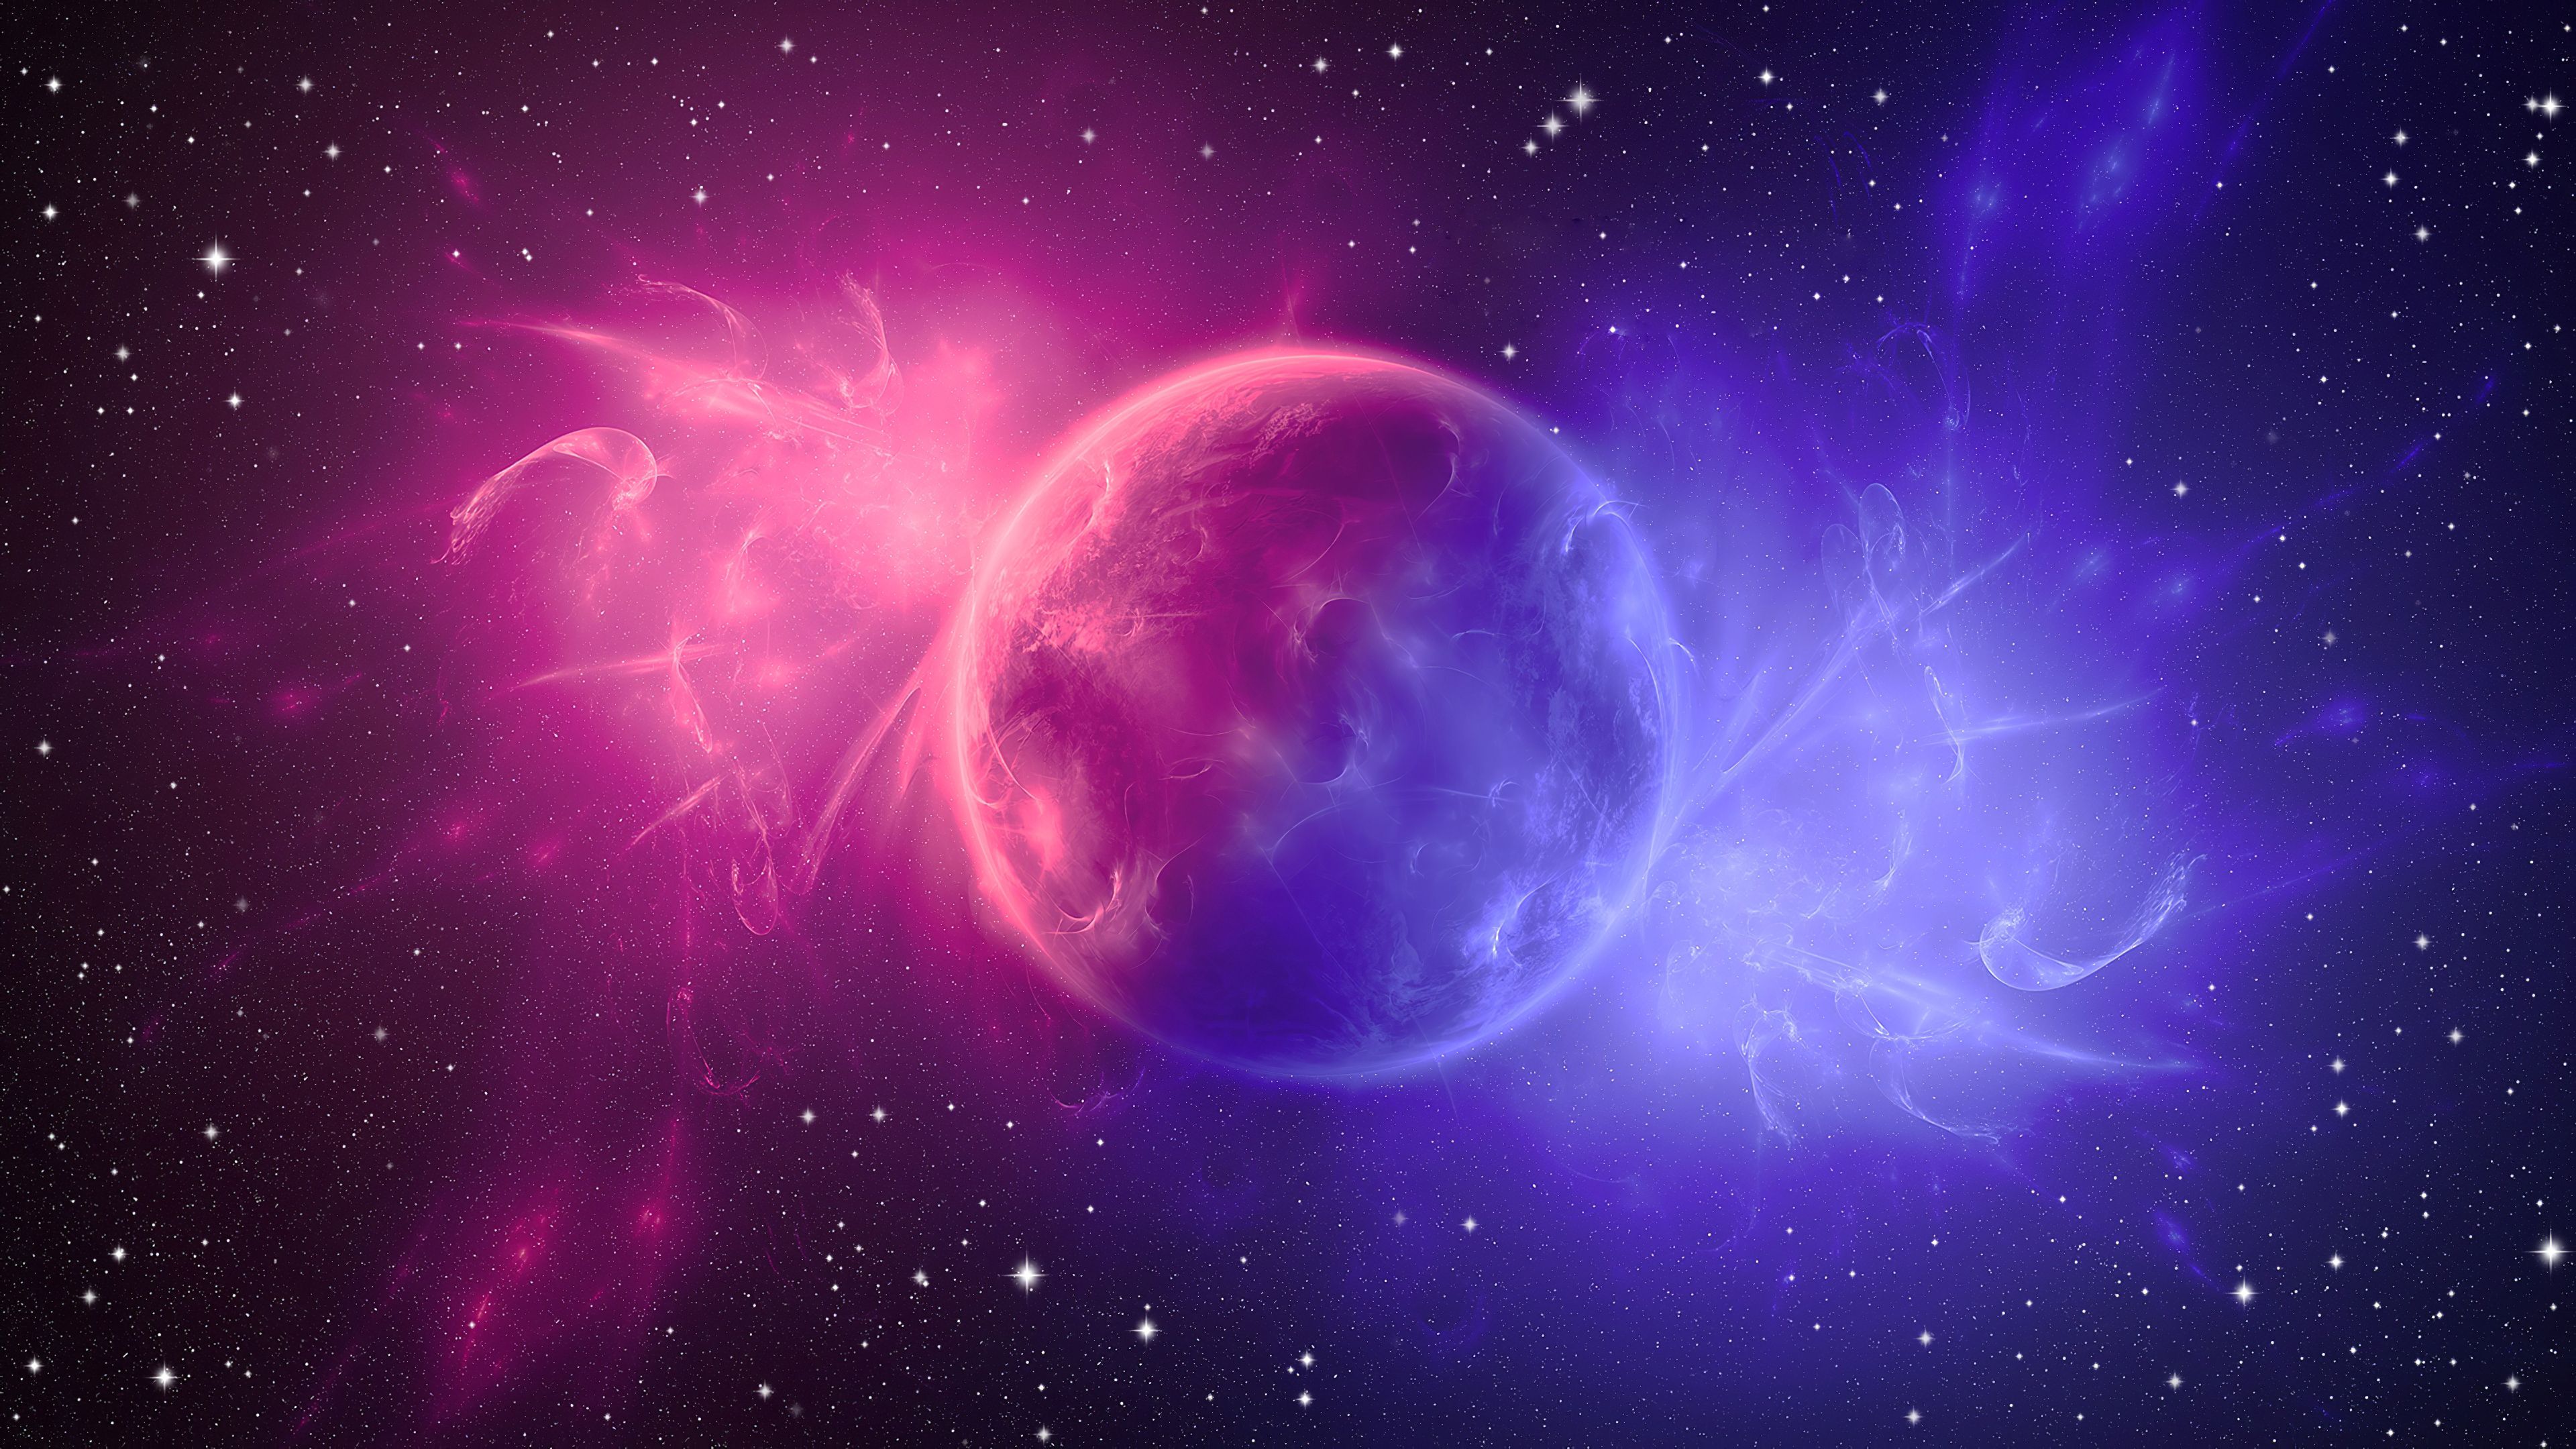 Space Digital Art Pink Planet 4k, HD Digital Universe, 4k Wallpaper, Image, Background, Photo and Picture